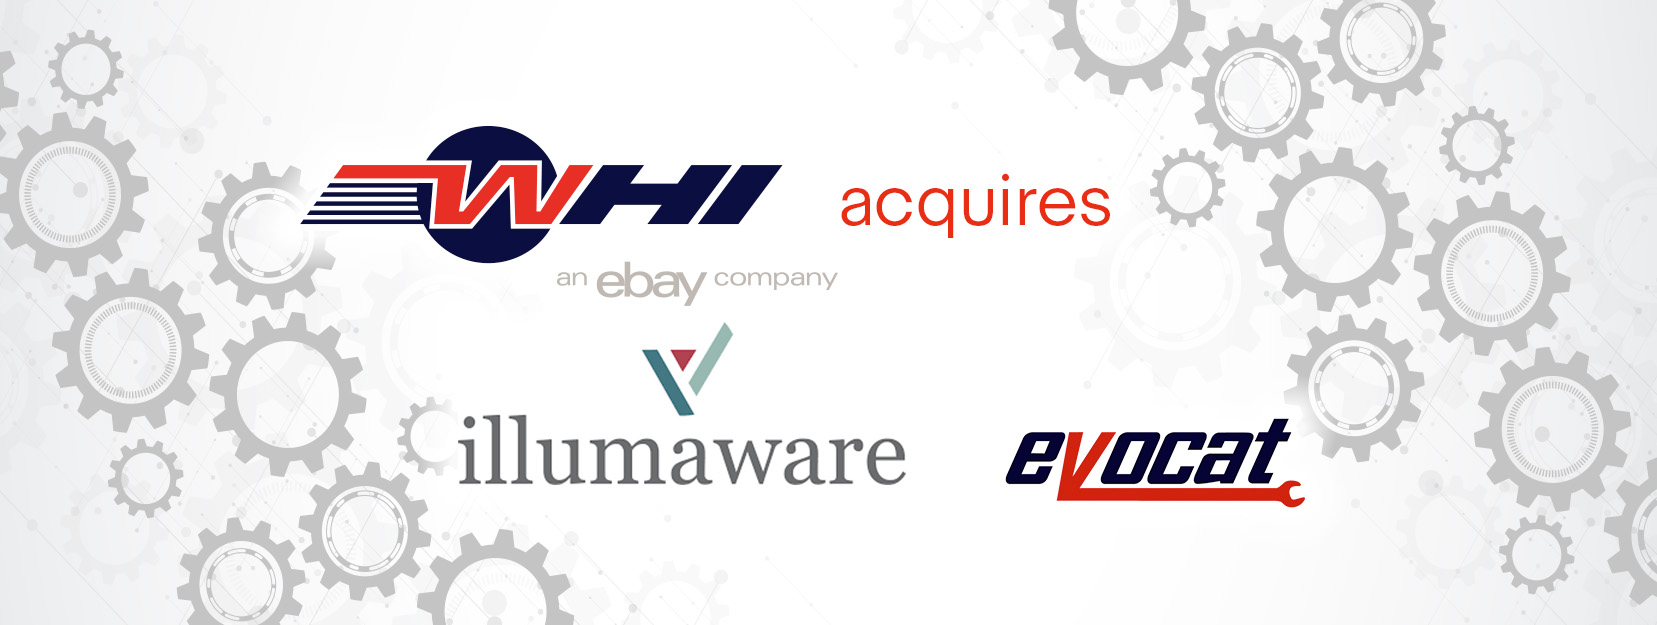 WHI Solutions acquires Illumaware Inc. and Evokat - WHI Solutions